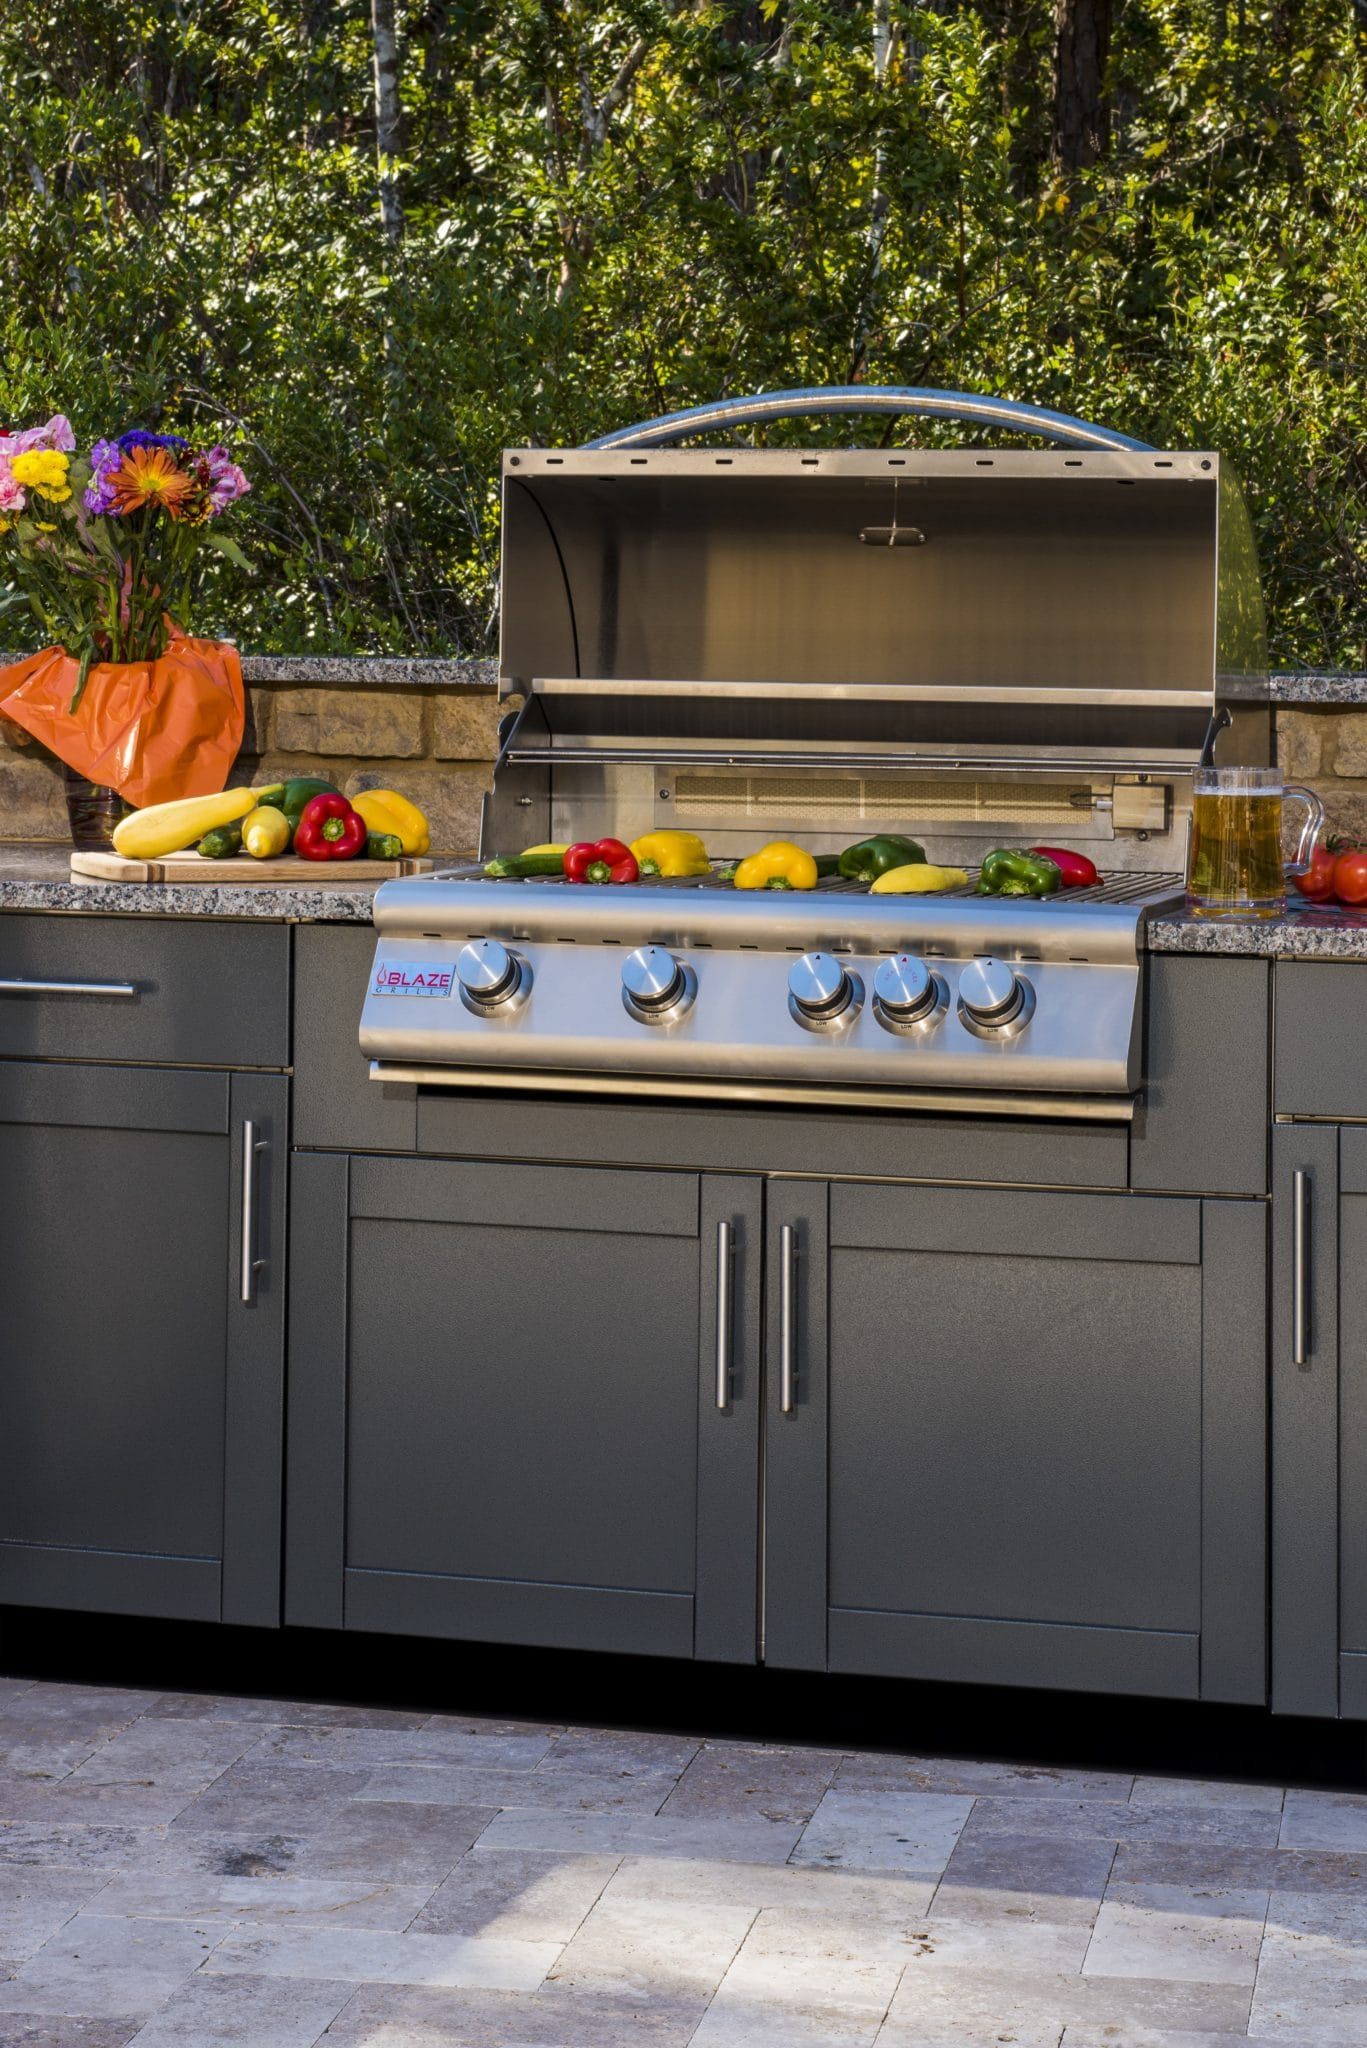 Danver Outdoor Kitchens
 Outdoor Kitchen Designs Ideas & Plans for Any Home